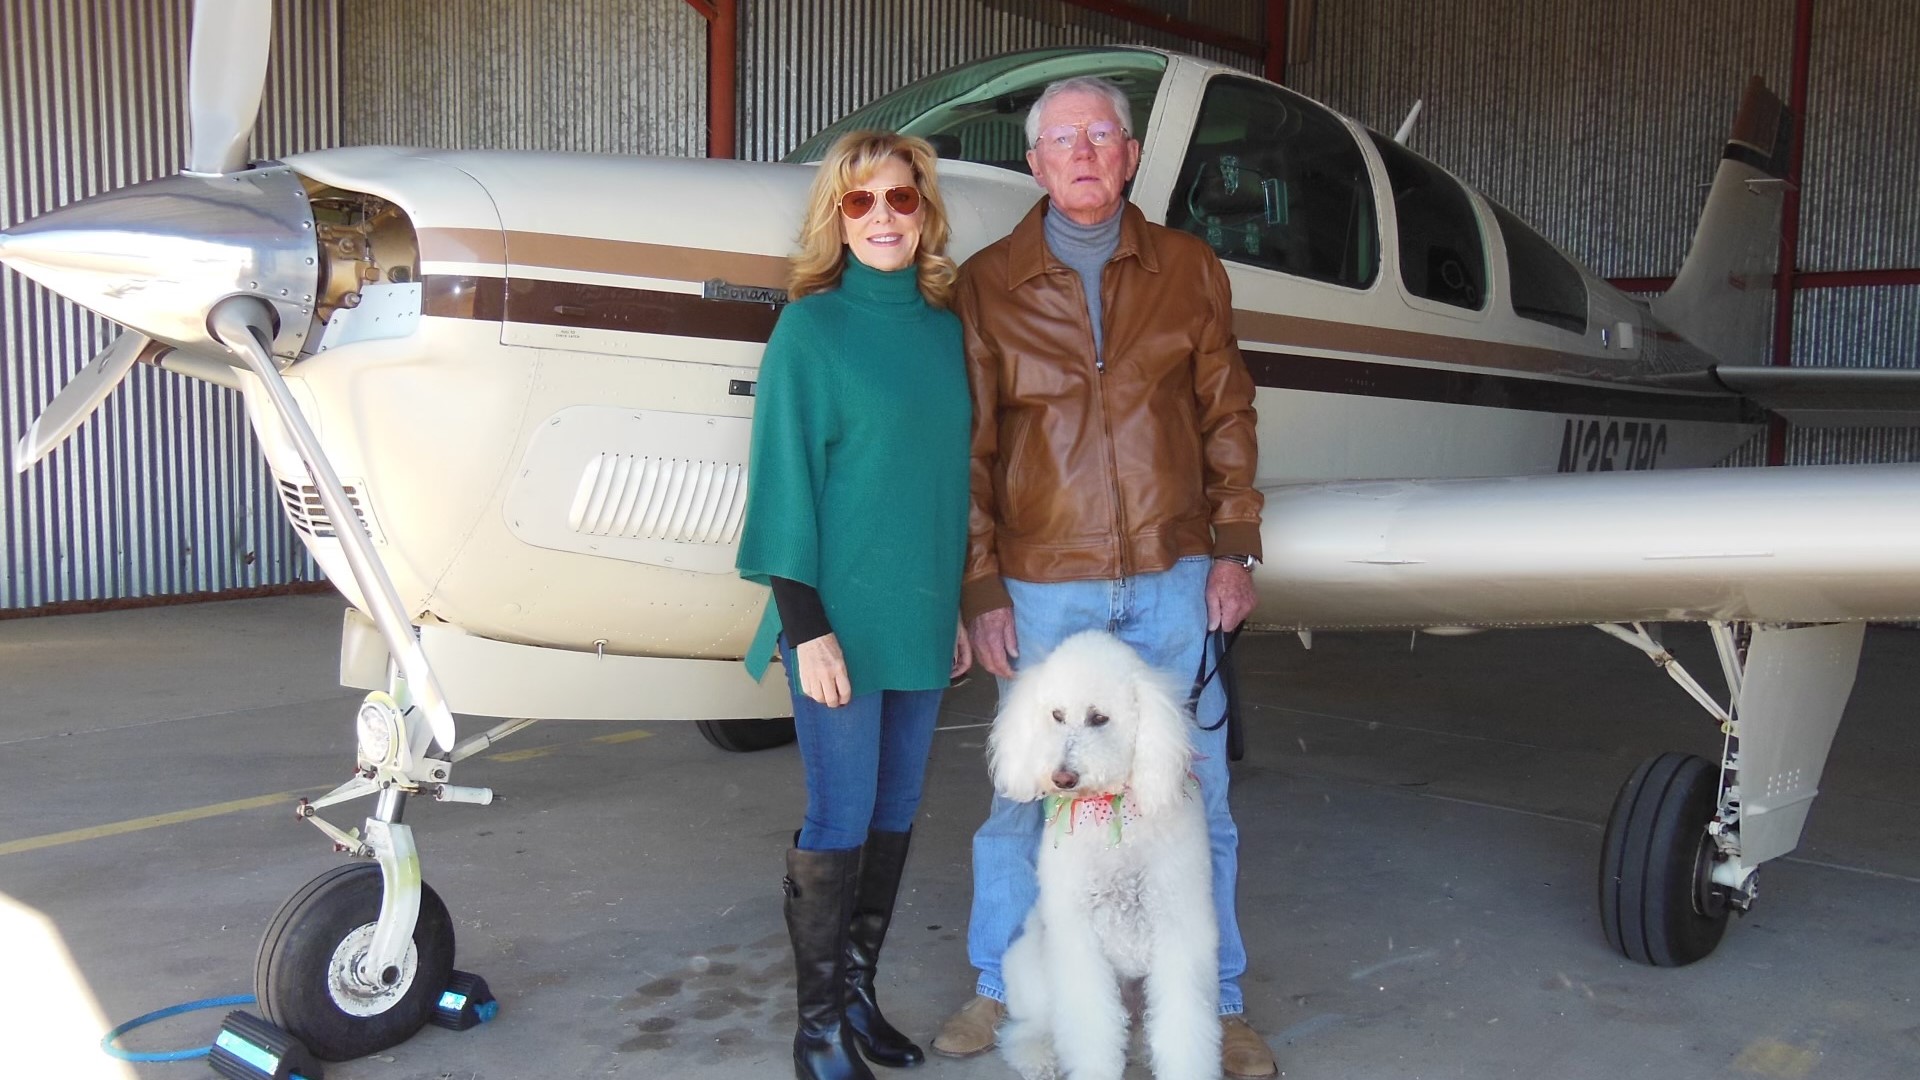 In the 70s, Vicki Hurt learned how to fly at the Midland Airpark. She's still flying out of there weekly and her family members have followed in her footsteps.